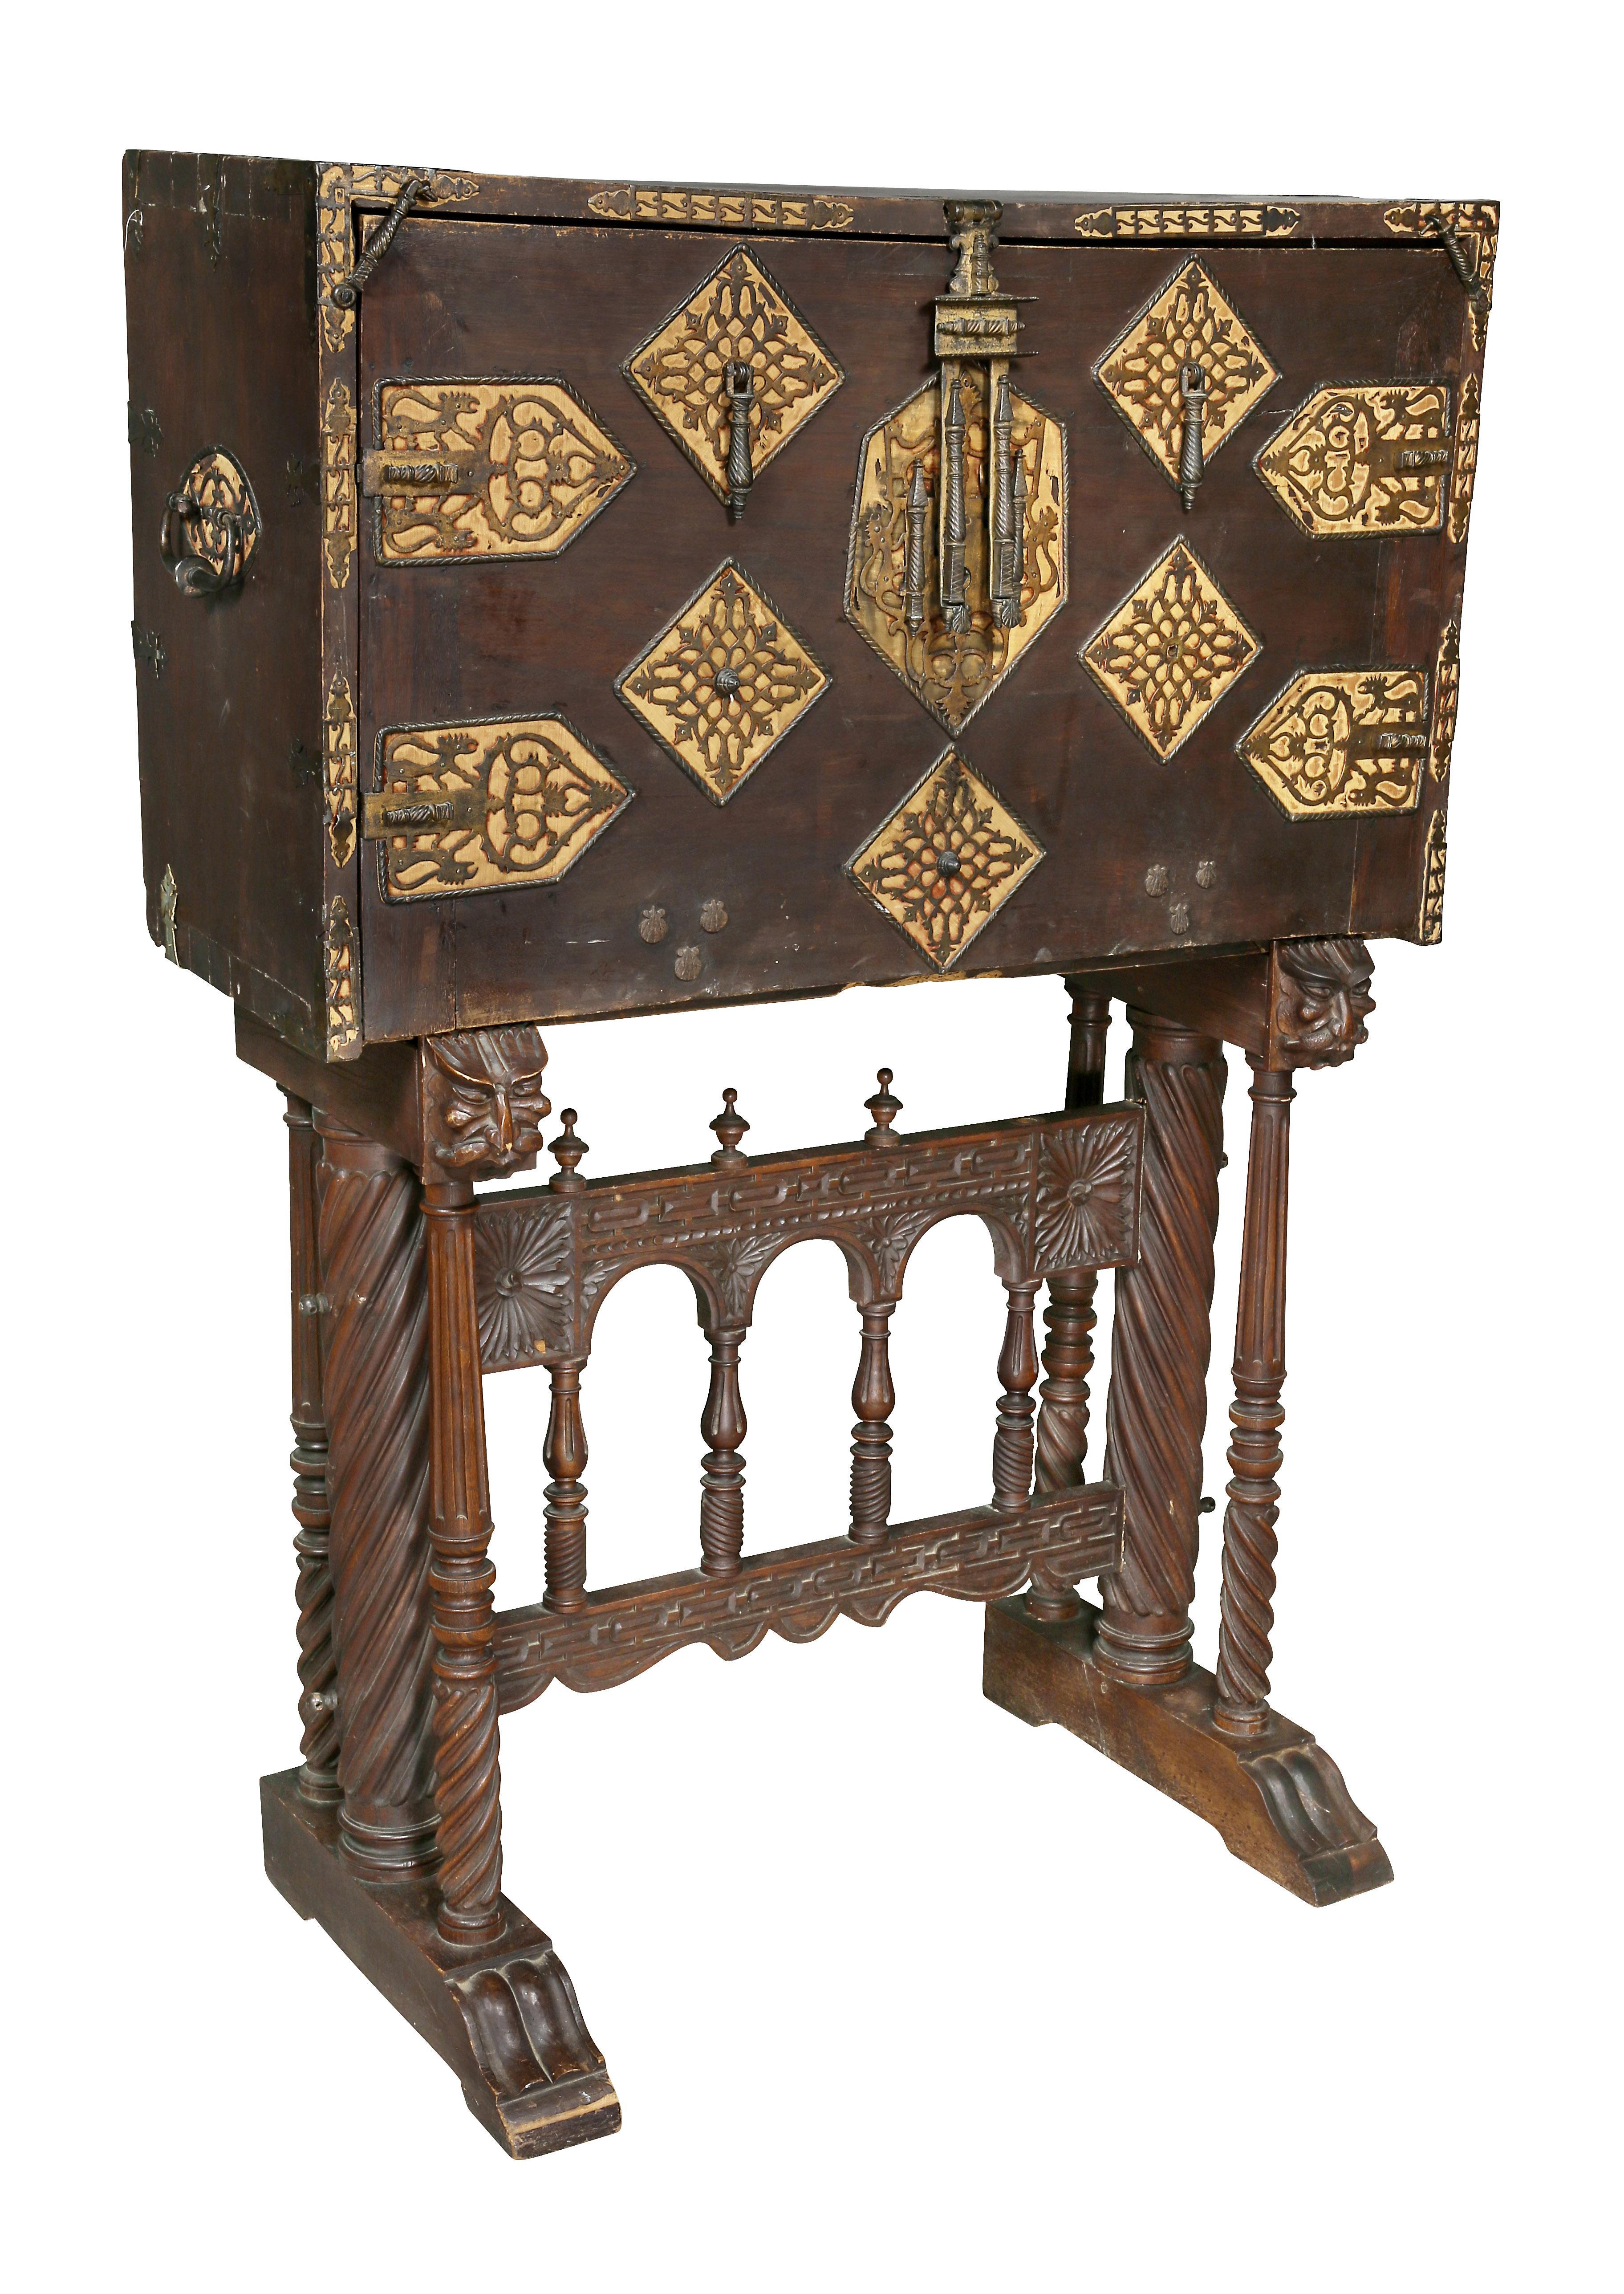 The top 17th century and the base 19th century. With fold down lid opening to a giltwood interior with an array of doors and drawers. The carved base with pullout / pull-out lid supports, arcaded stretcher and shoe feet. Purchased Sothebys for